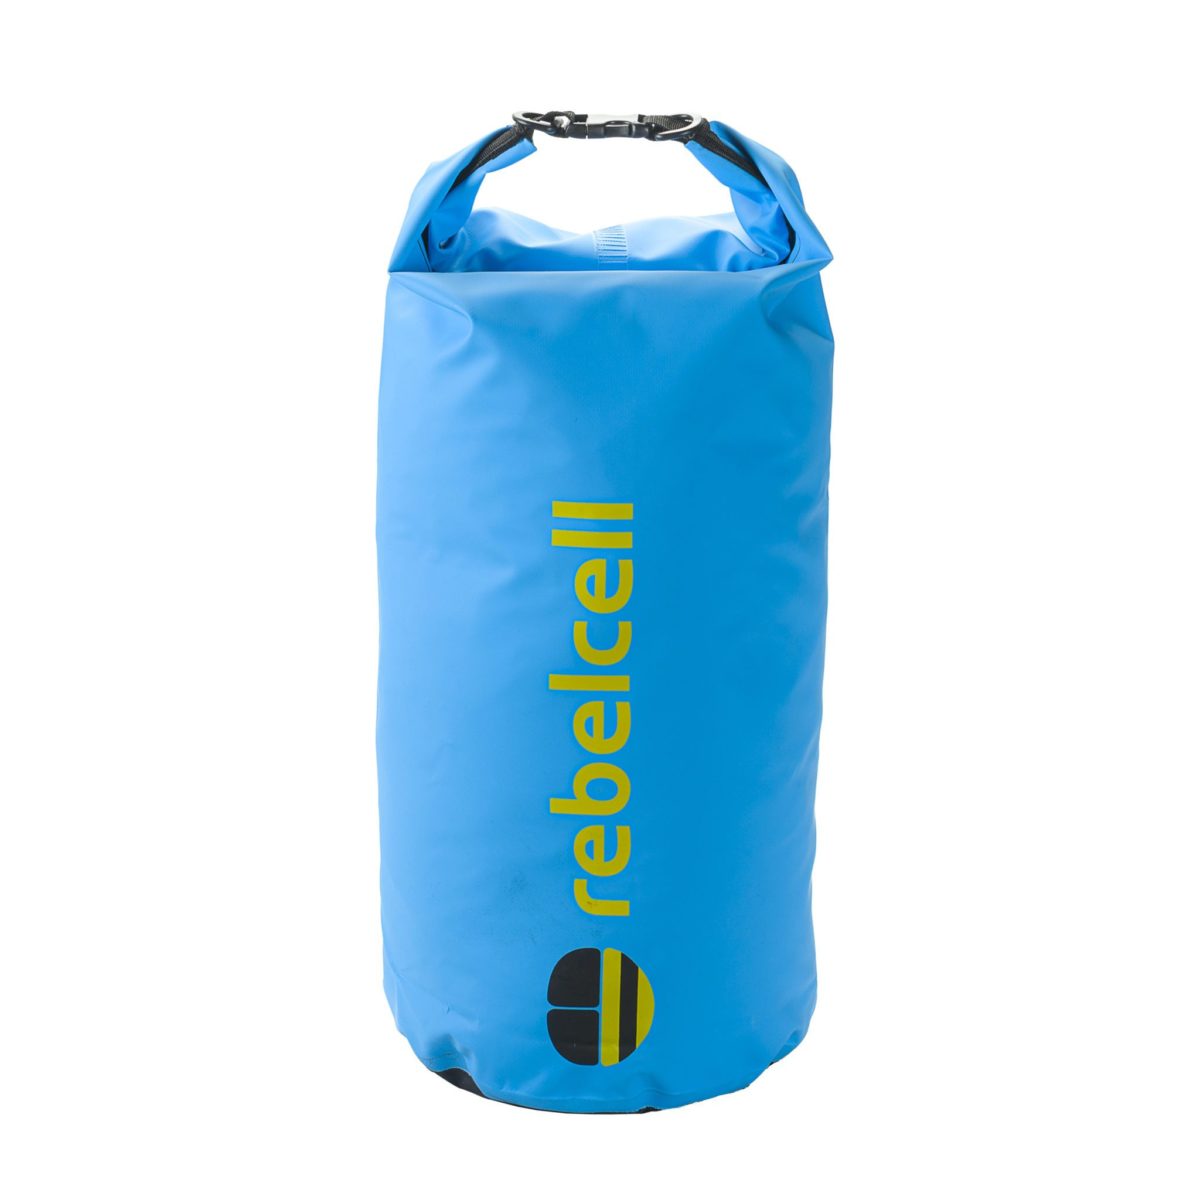 Rebelcell Dry Bag Large (40L) product image